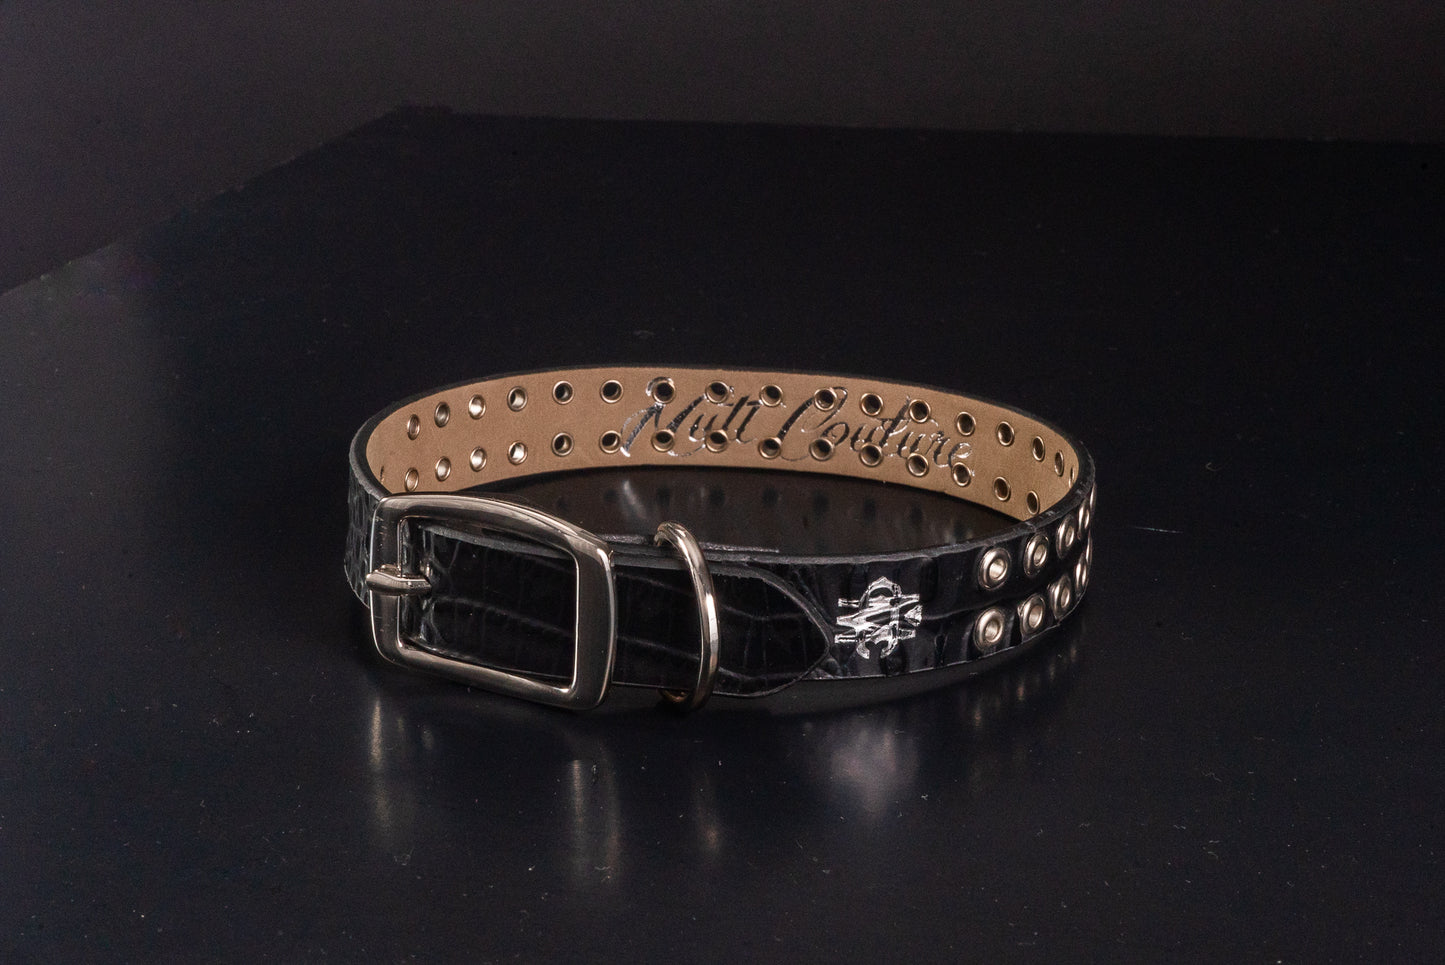 Faux Black Croc Dog Collar With Chrome Eyelets